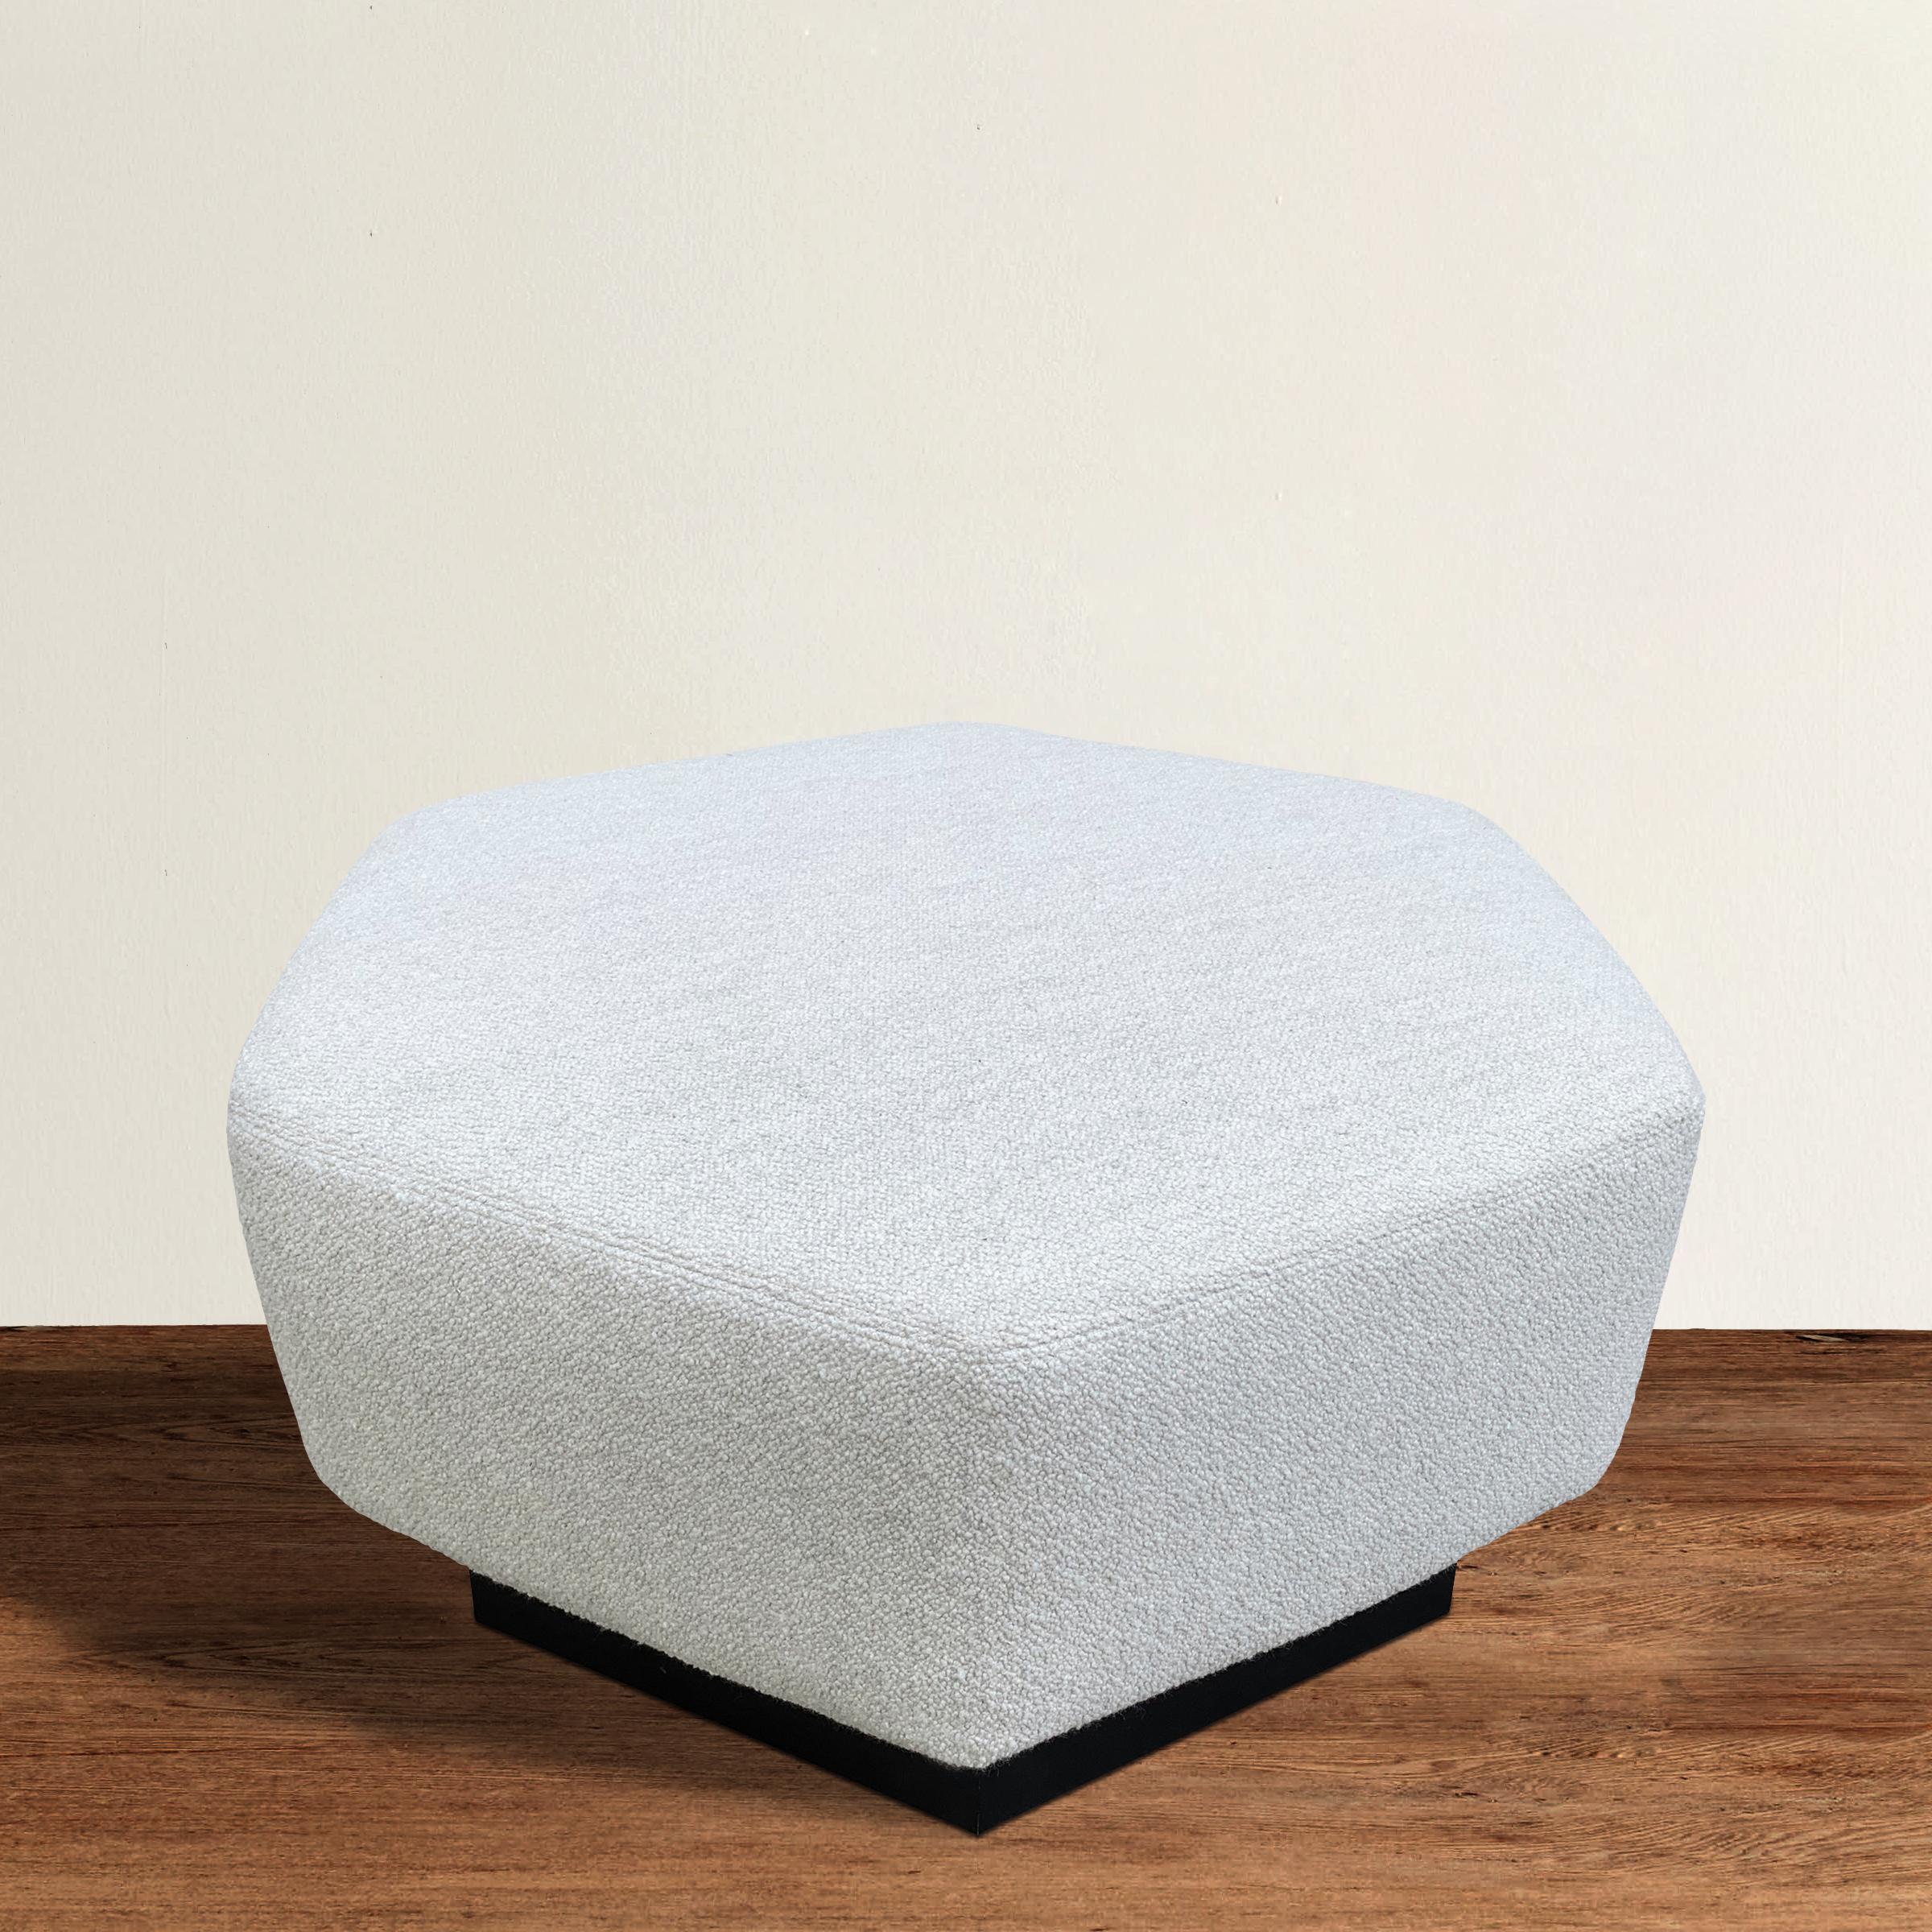 A wonderful modern hexagonal ottoman upholstered in an Italian wool bouclé. This was made to order to be paired with a set of four Saporiti 